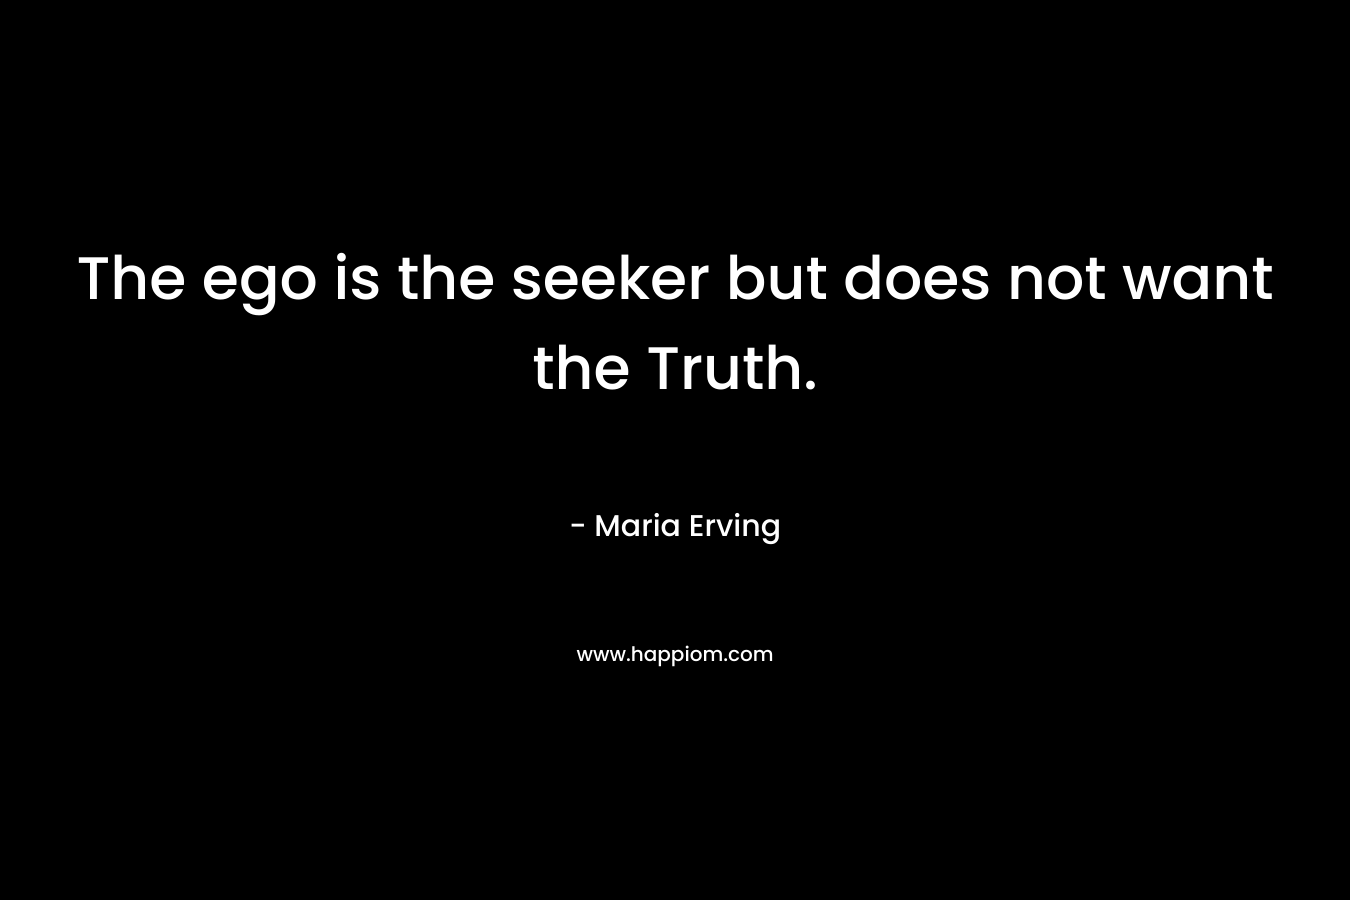 The ego is the seeker but does not want the Truth. – Maria Erving